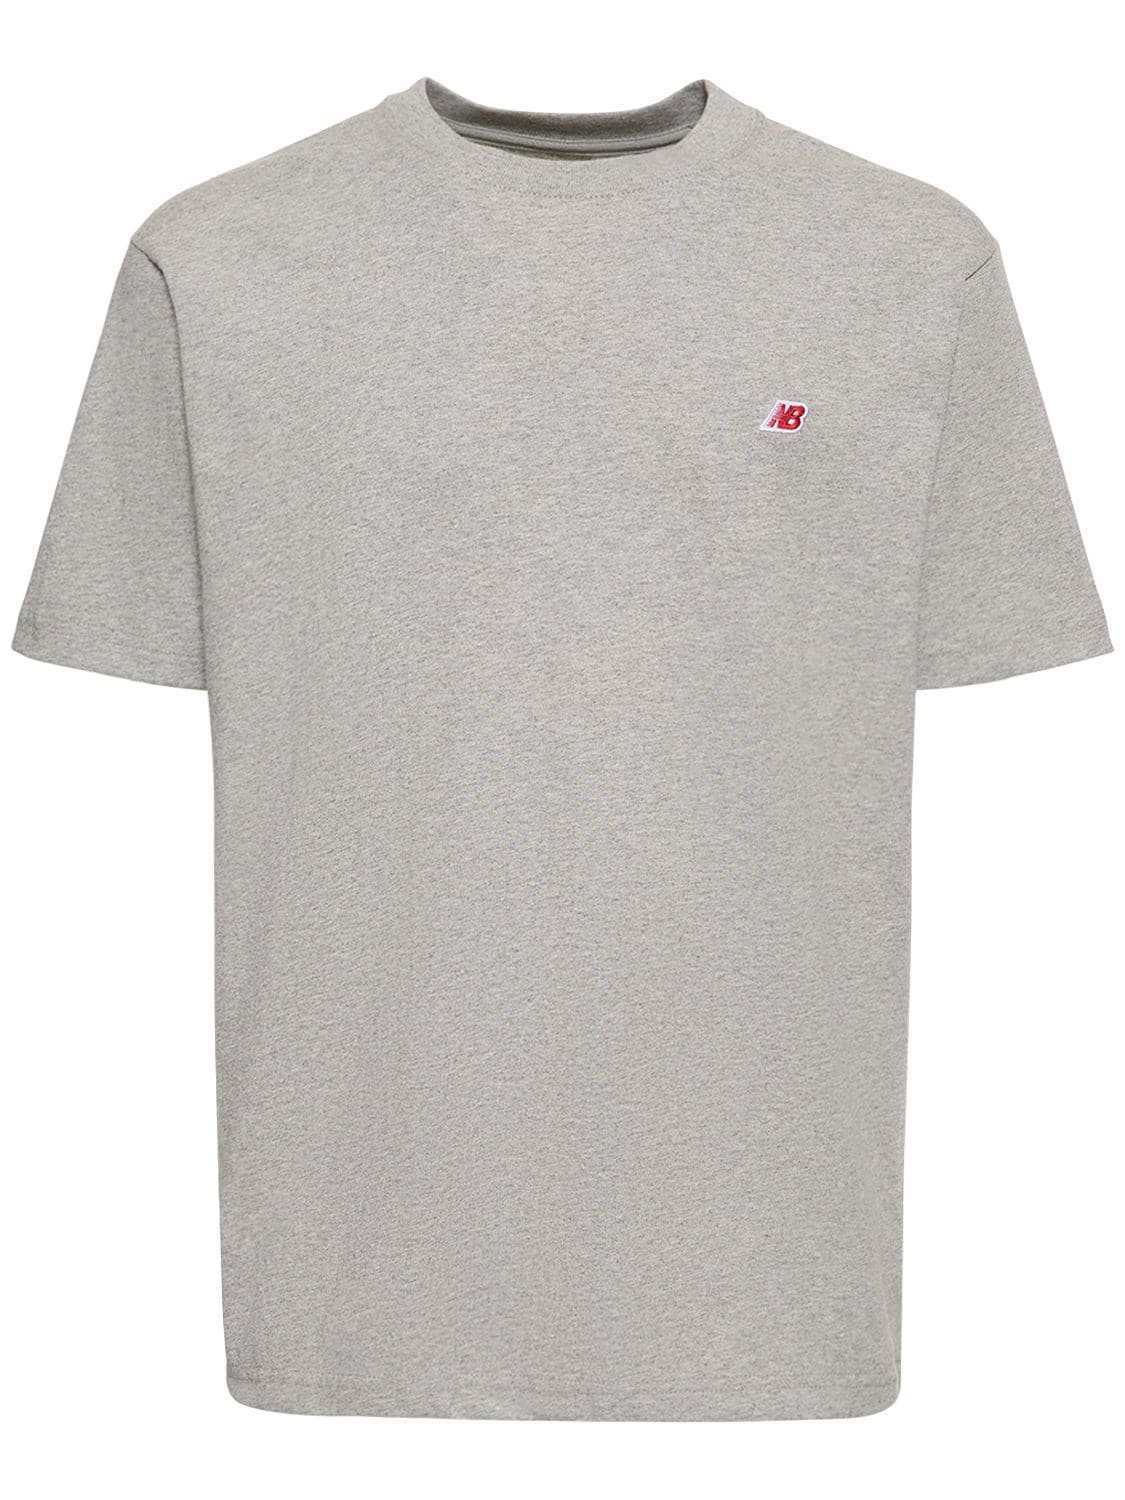 New Balance Made In Usa Core Cotton Blend T-shirt In Athletic Grey